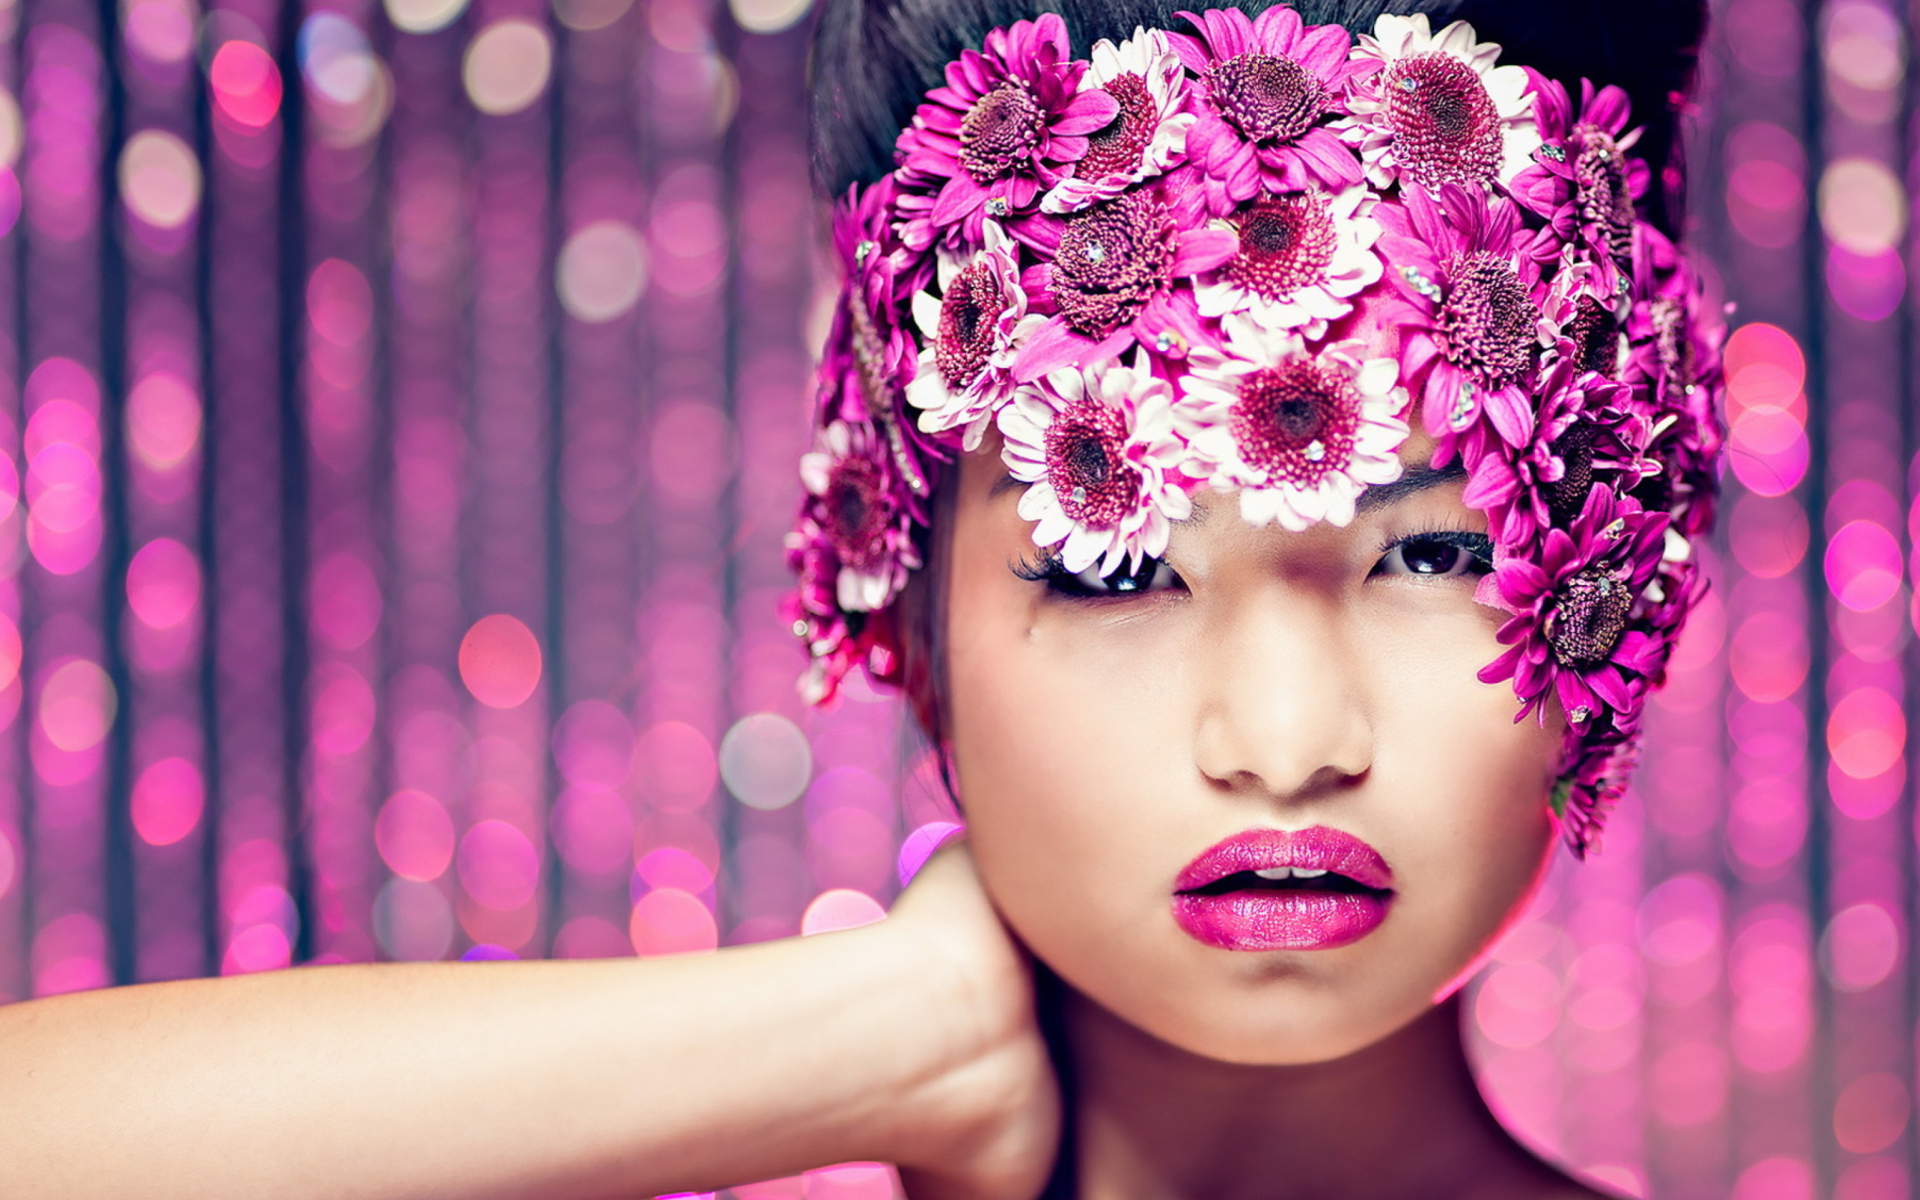 Asian Fashion Model With Pink Flower Wreath wallpaper 1920x1200